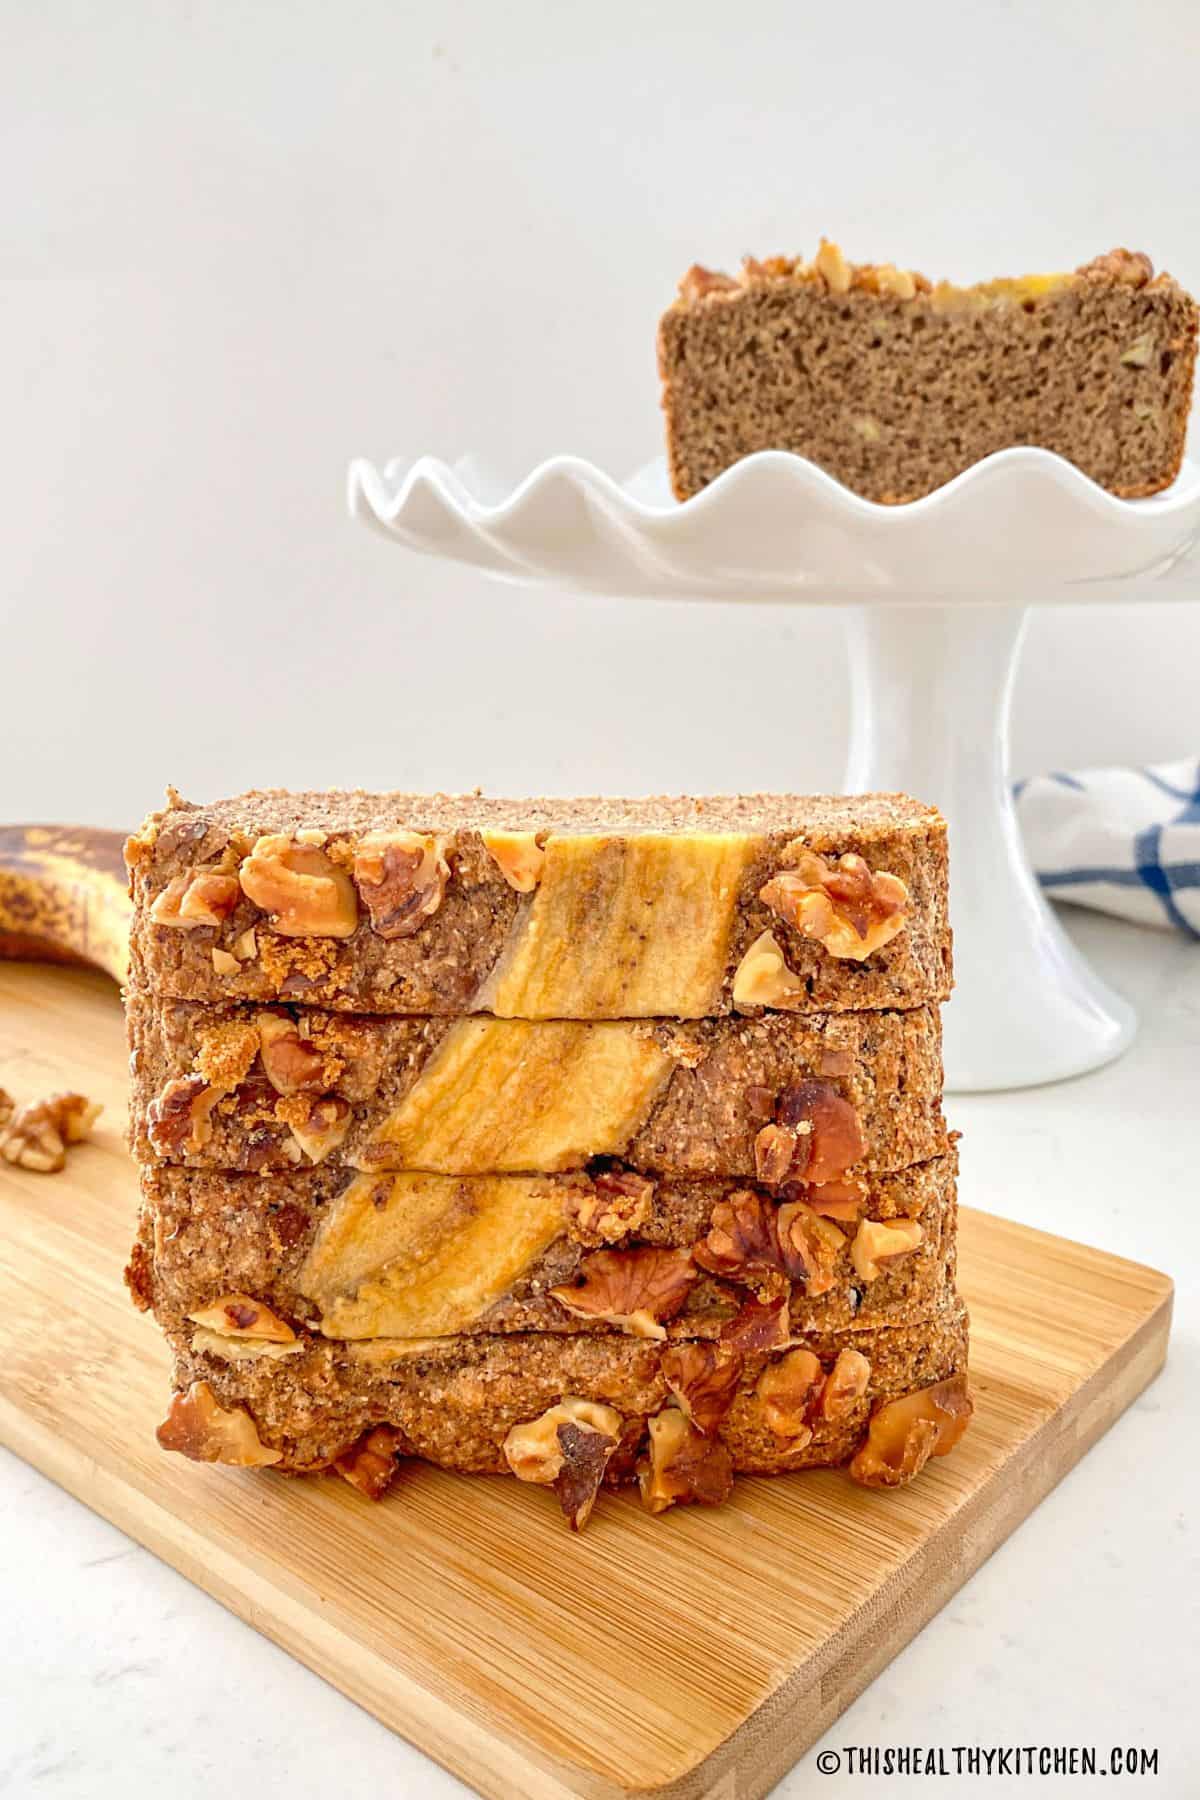 Four slices of banana bread stacked vertically on cutting board.